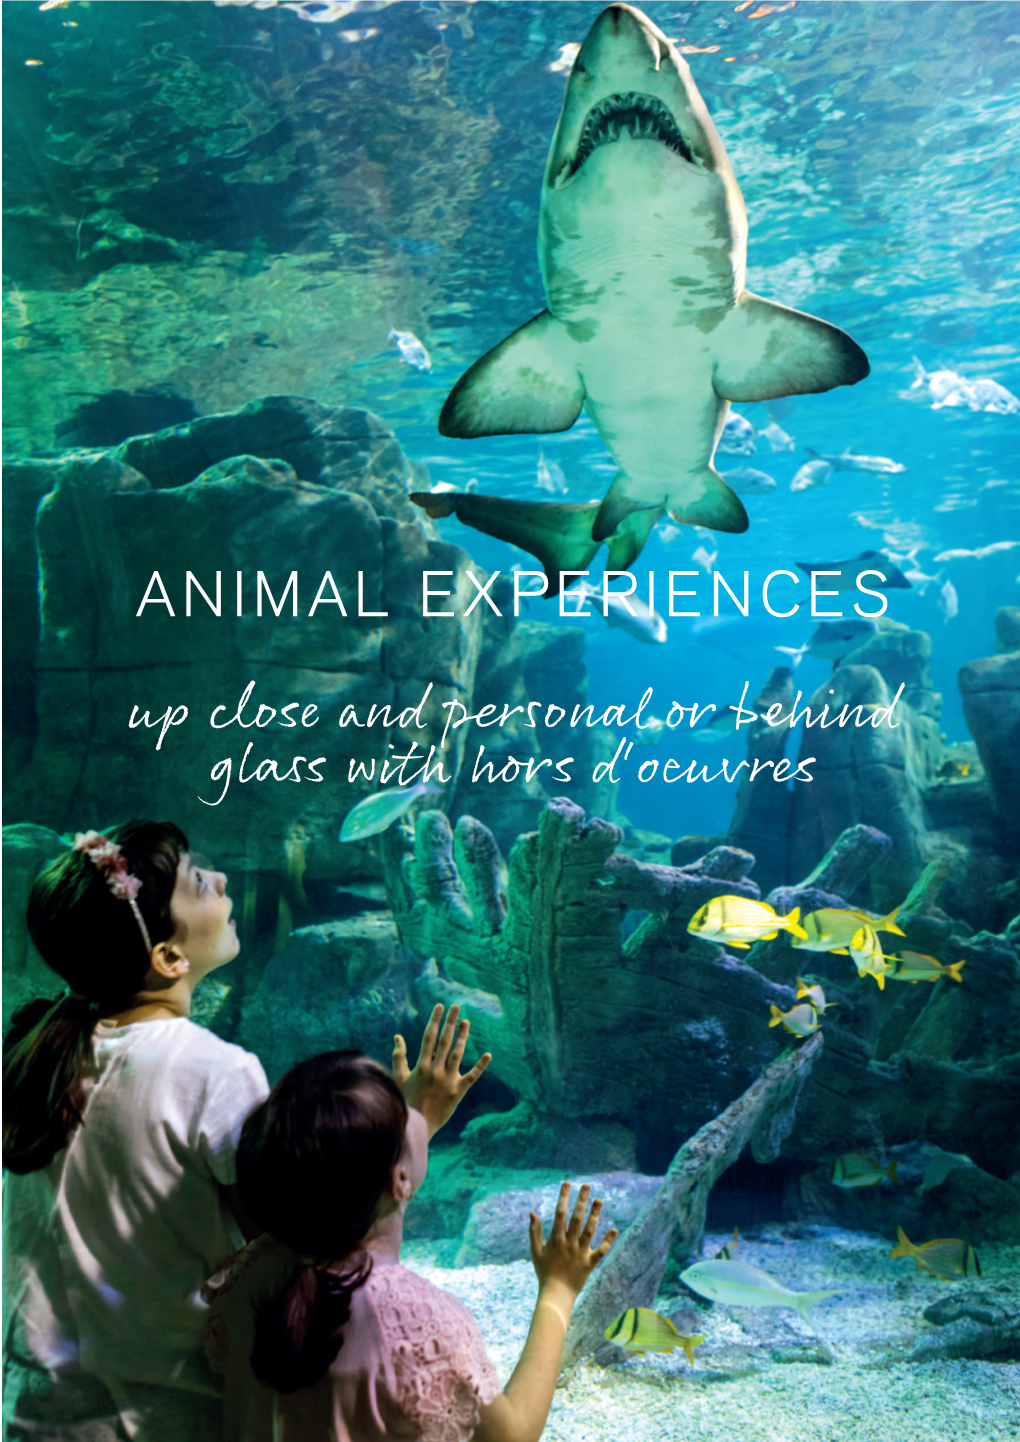 ANIMAL EXPERIENCES up Close and Personal Or Behind Glass with Hors D'oeuvres